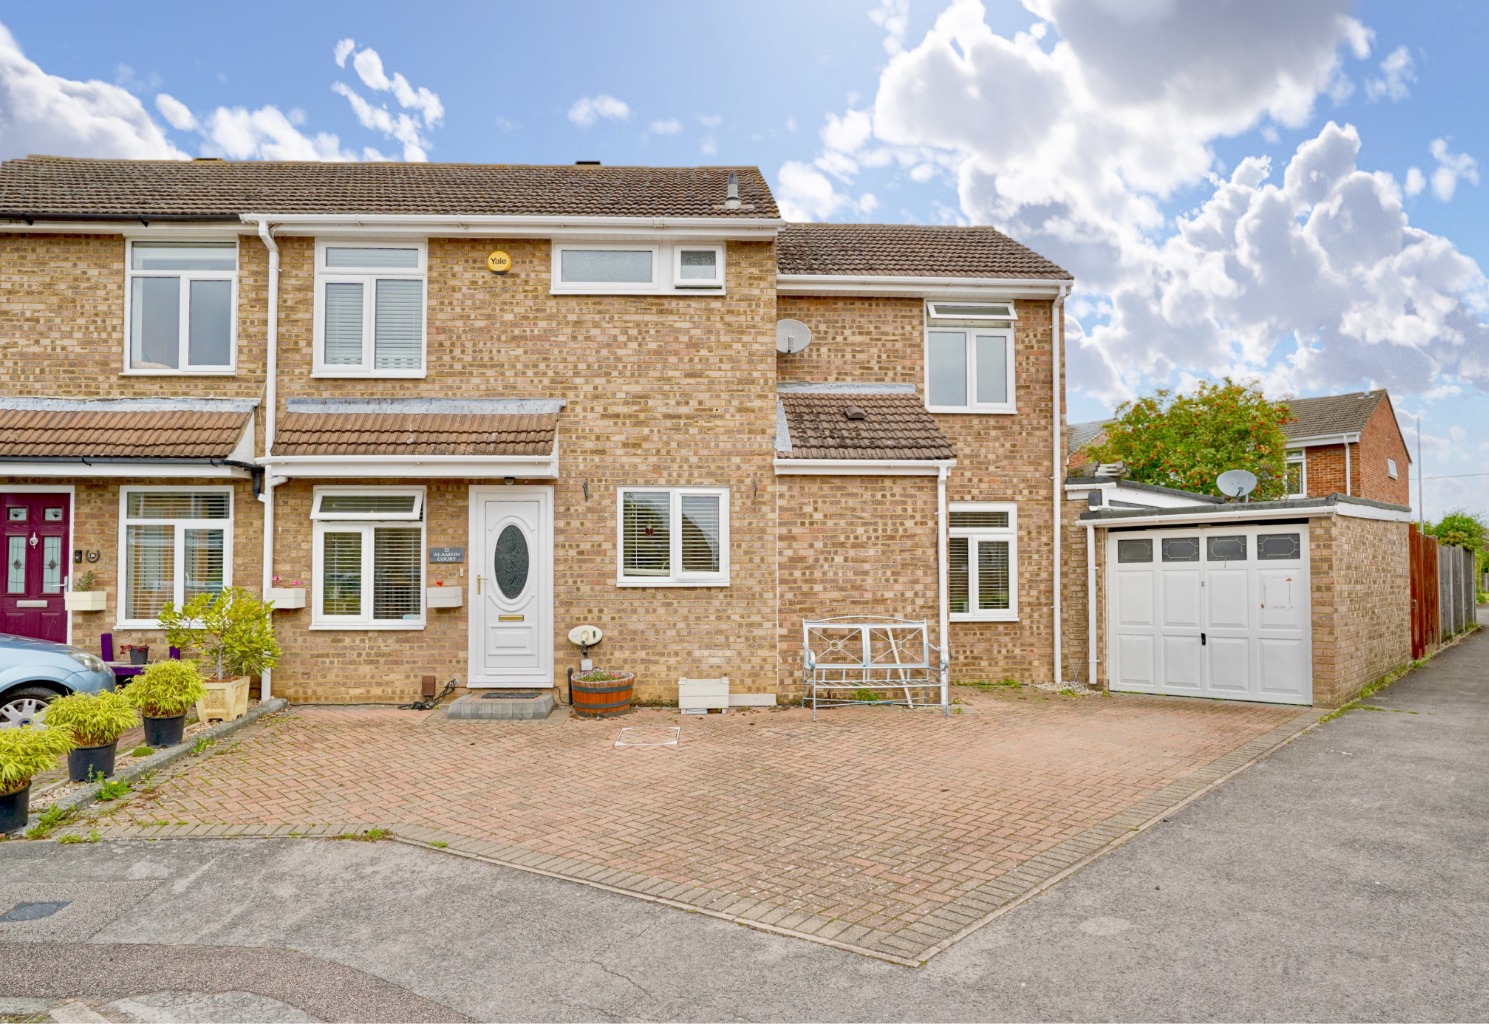 4 bed semi-detached house for sale in Alamein Court, St Neots - Property Image 1